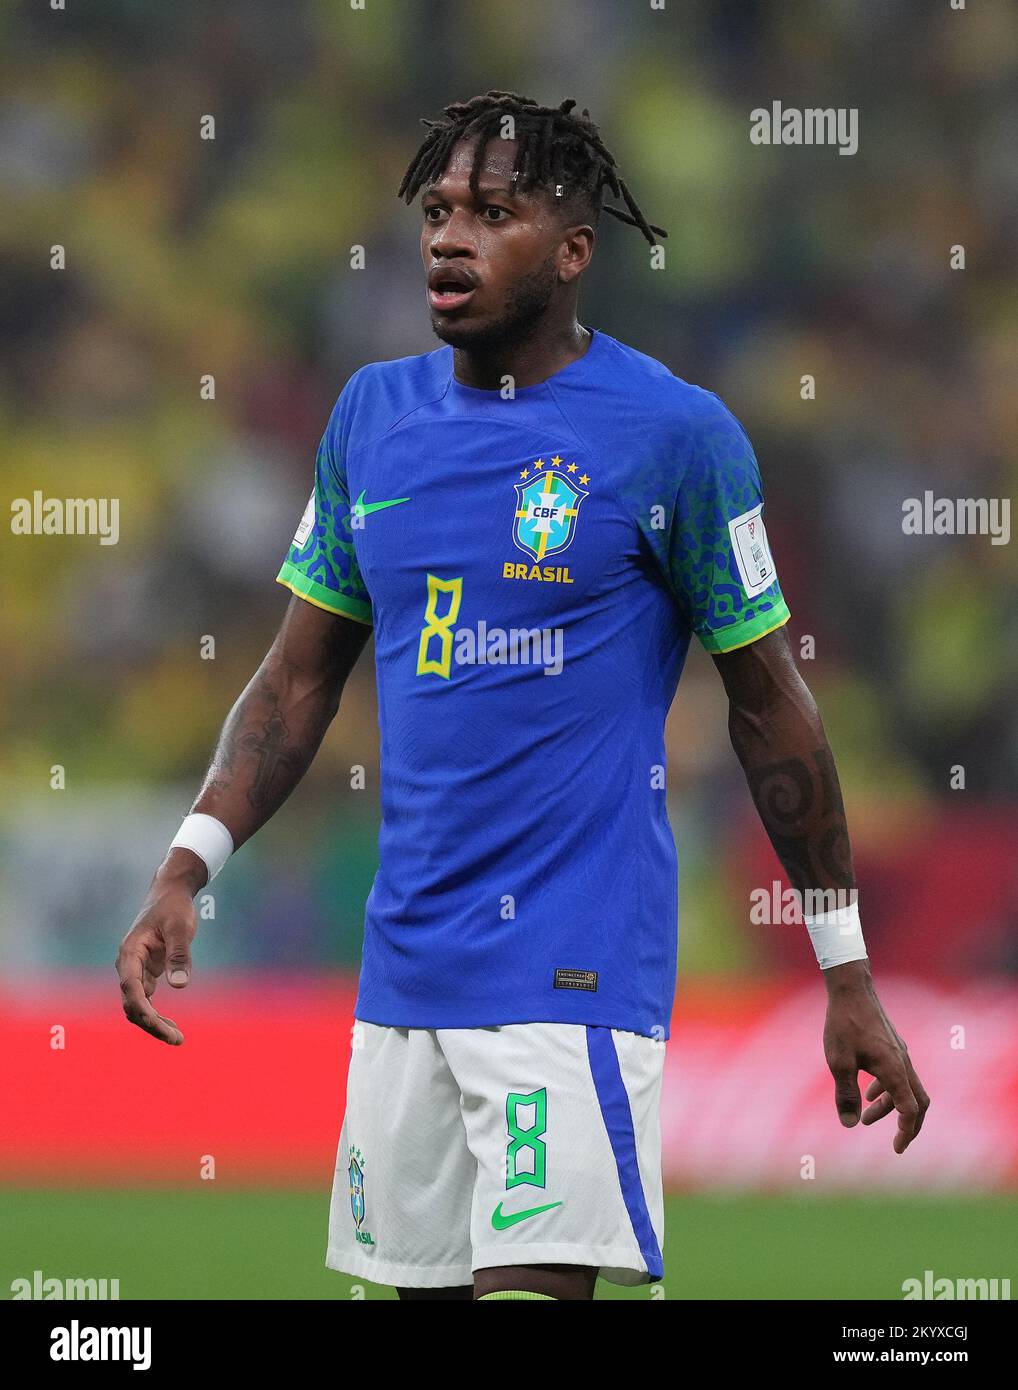 https://c8.alamy.com/comp/2KYXCGJ/brazils-fred-during-the-fifa-world-cup-group-g-match-at-the-lusail-stadium-in-lusail-qatar-picture-date-friday-december-2-2022-2KYXCGJ.jpg